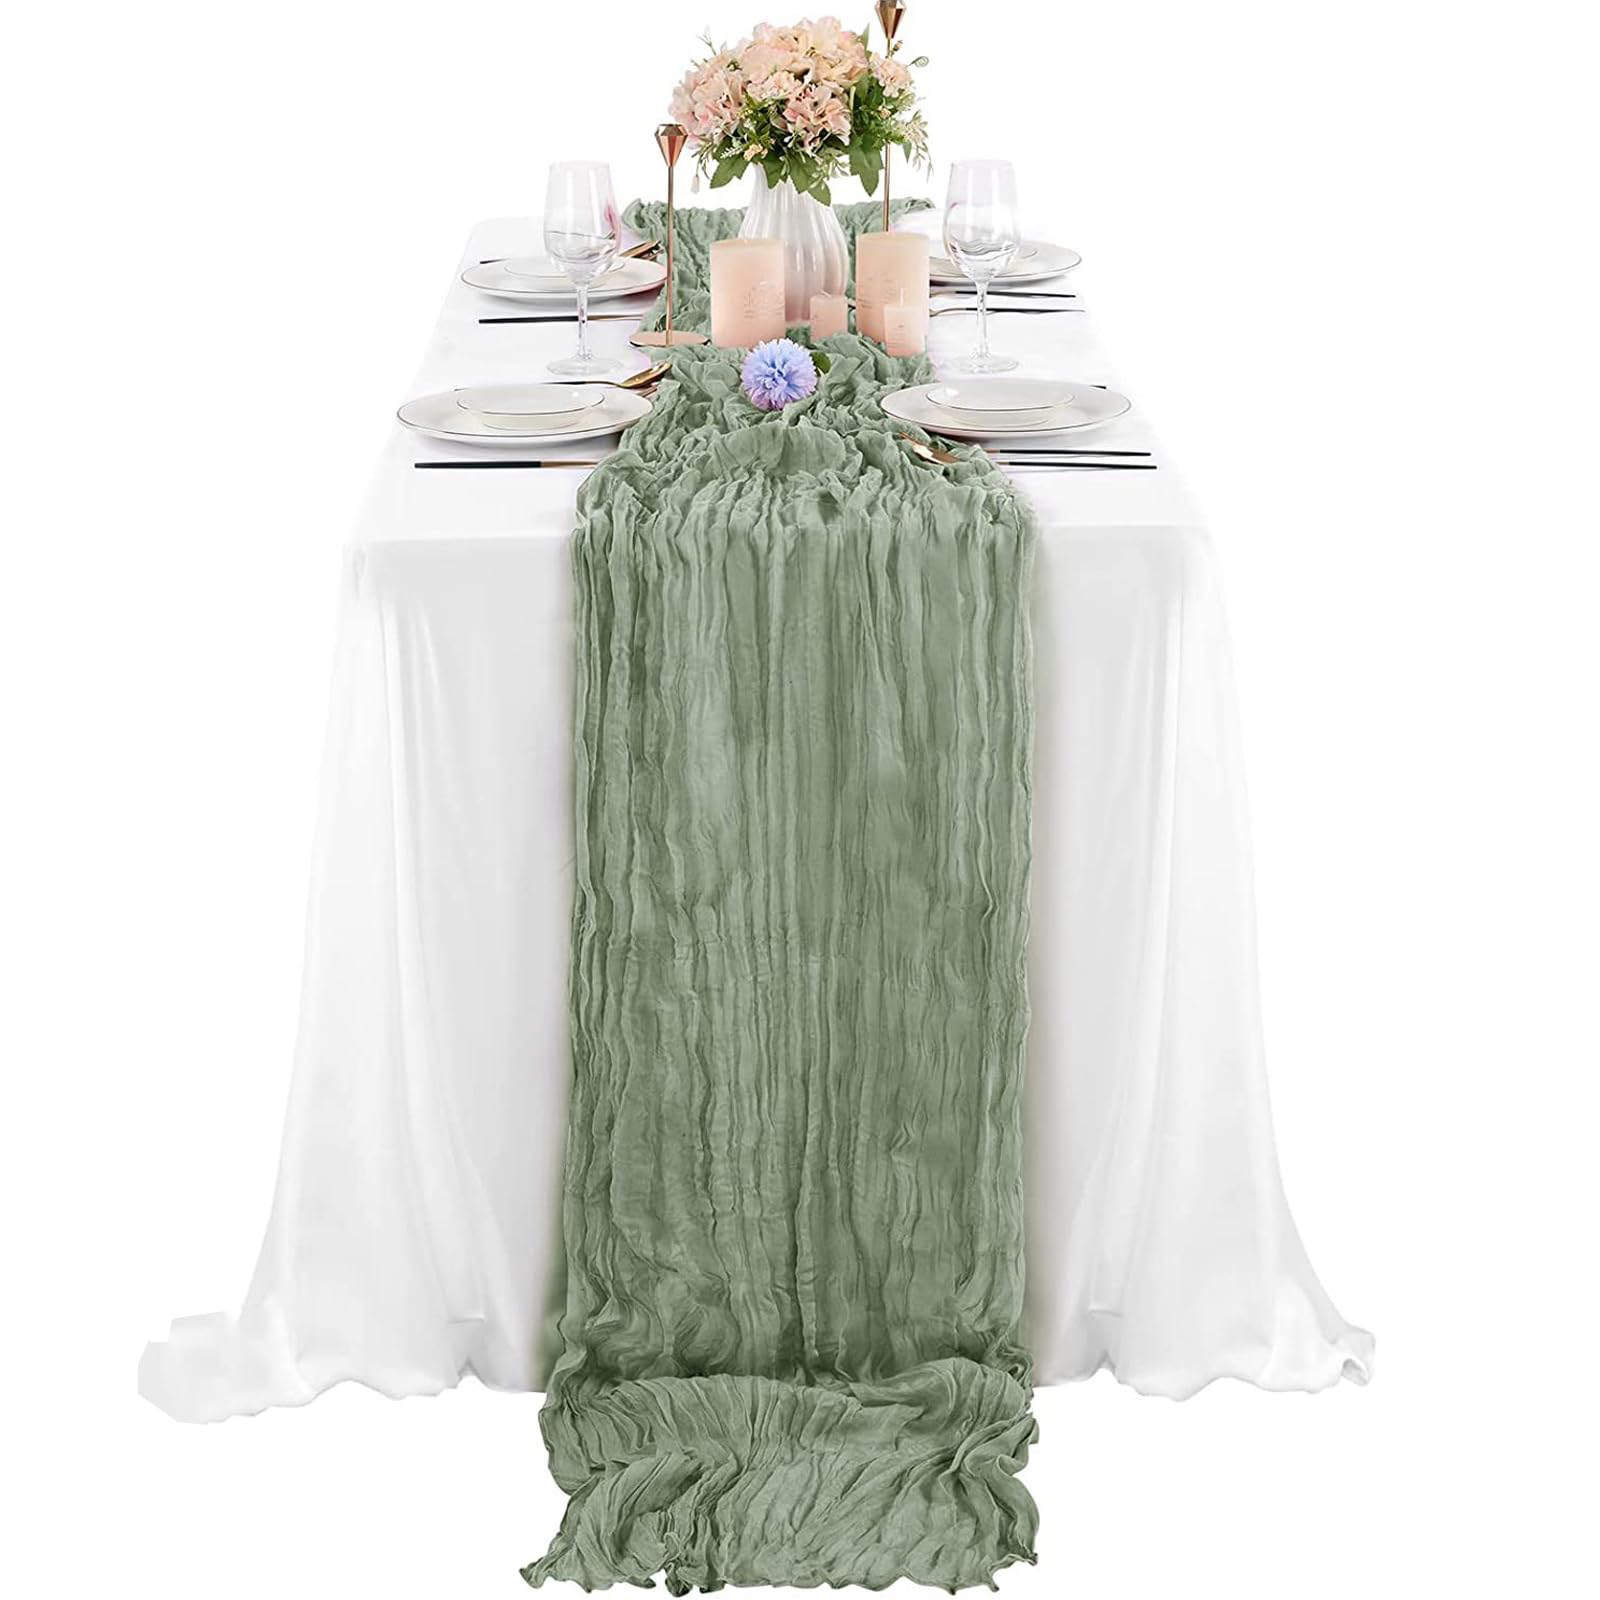 Photo 1 of 2Pack 10Ft Cheesecloth Table Runner, 35x120Inch Sage Green Rustic Boho Gauze Wrinkled Cheese Cloth Table Runner for Baby Bridal Shower Wedding Birthday Party Table Decoration